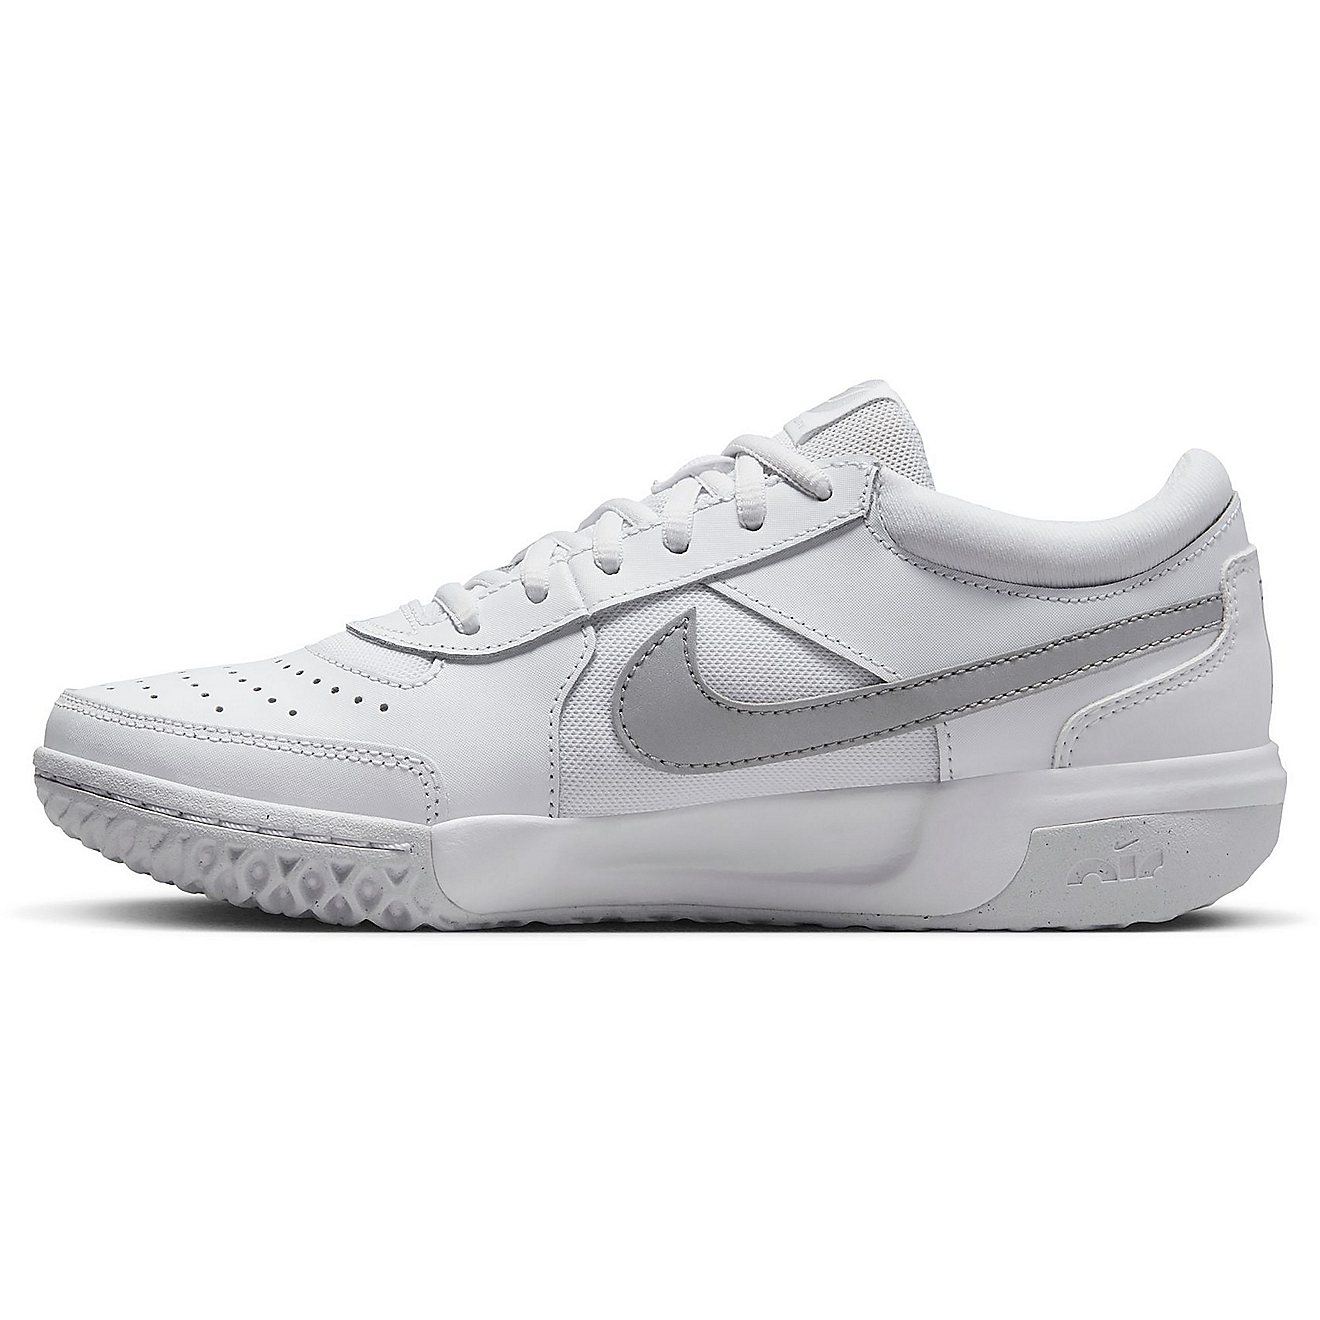 Nike Women's Zoom Court Lite 3 Tennis Shoes                                                                                      - view number 2